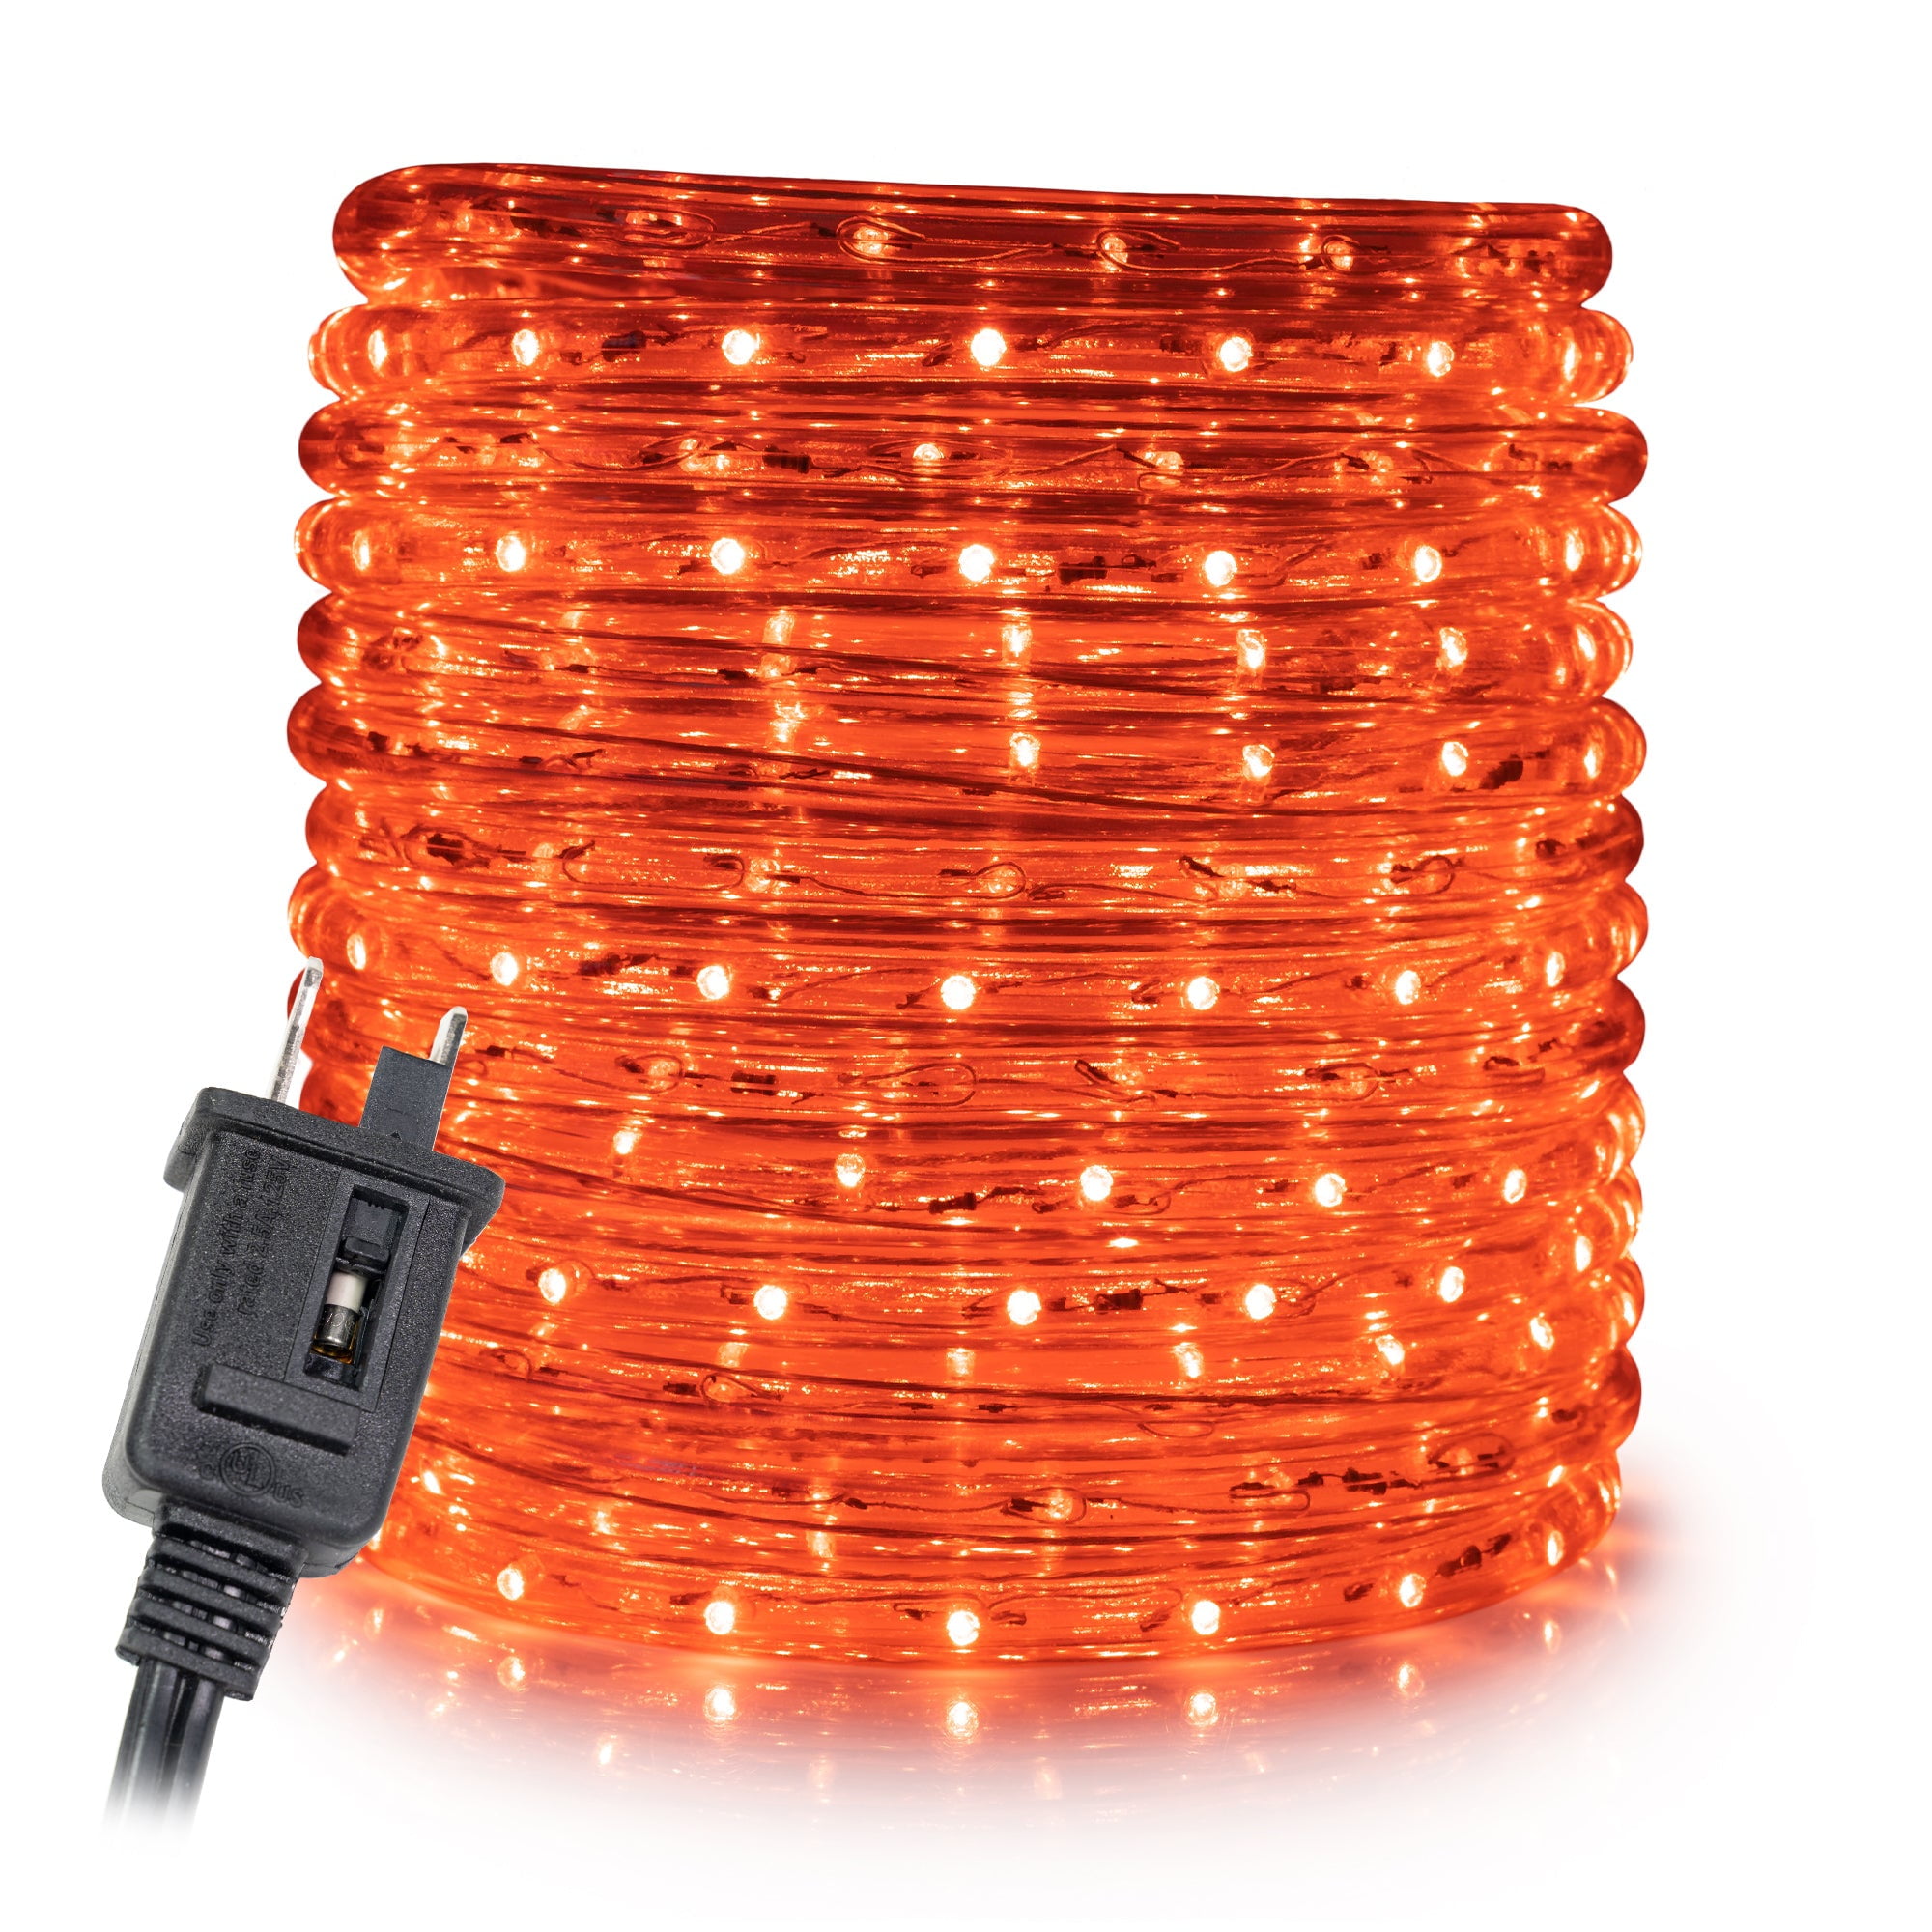 Red LED Rope Lights 3/8" 2 Wire Simple Extendable Accent Party Xmas Decorations 